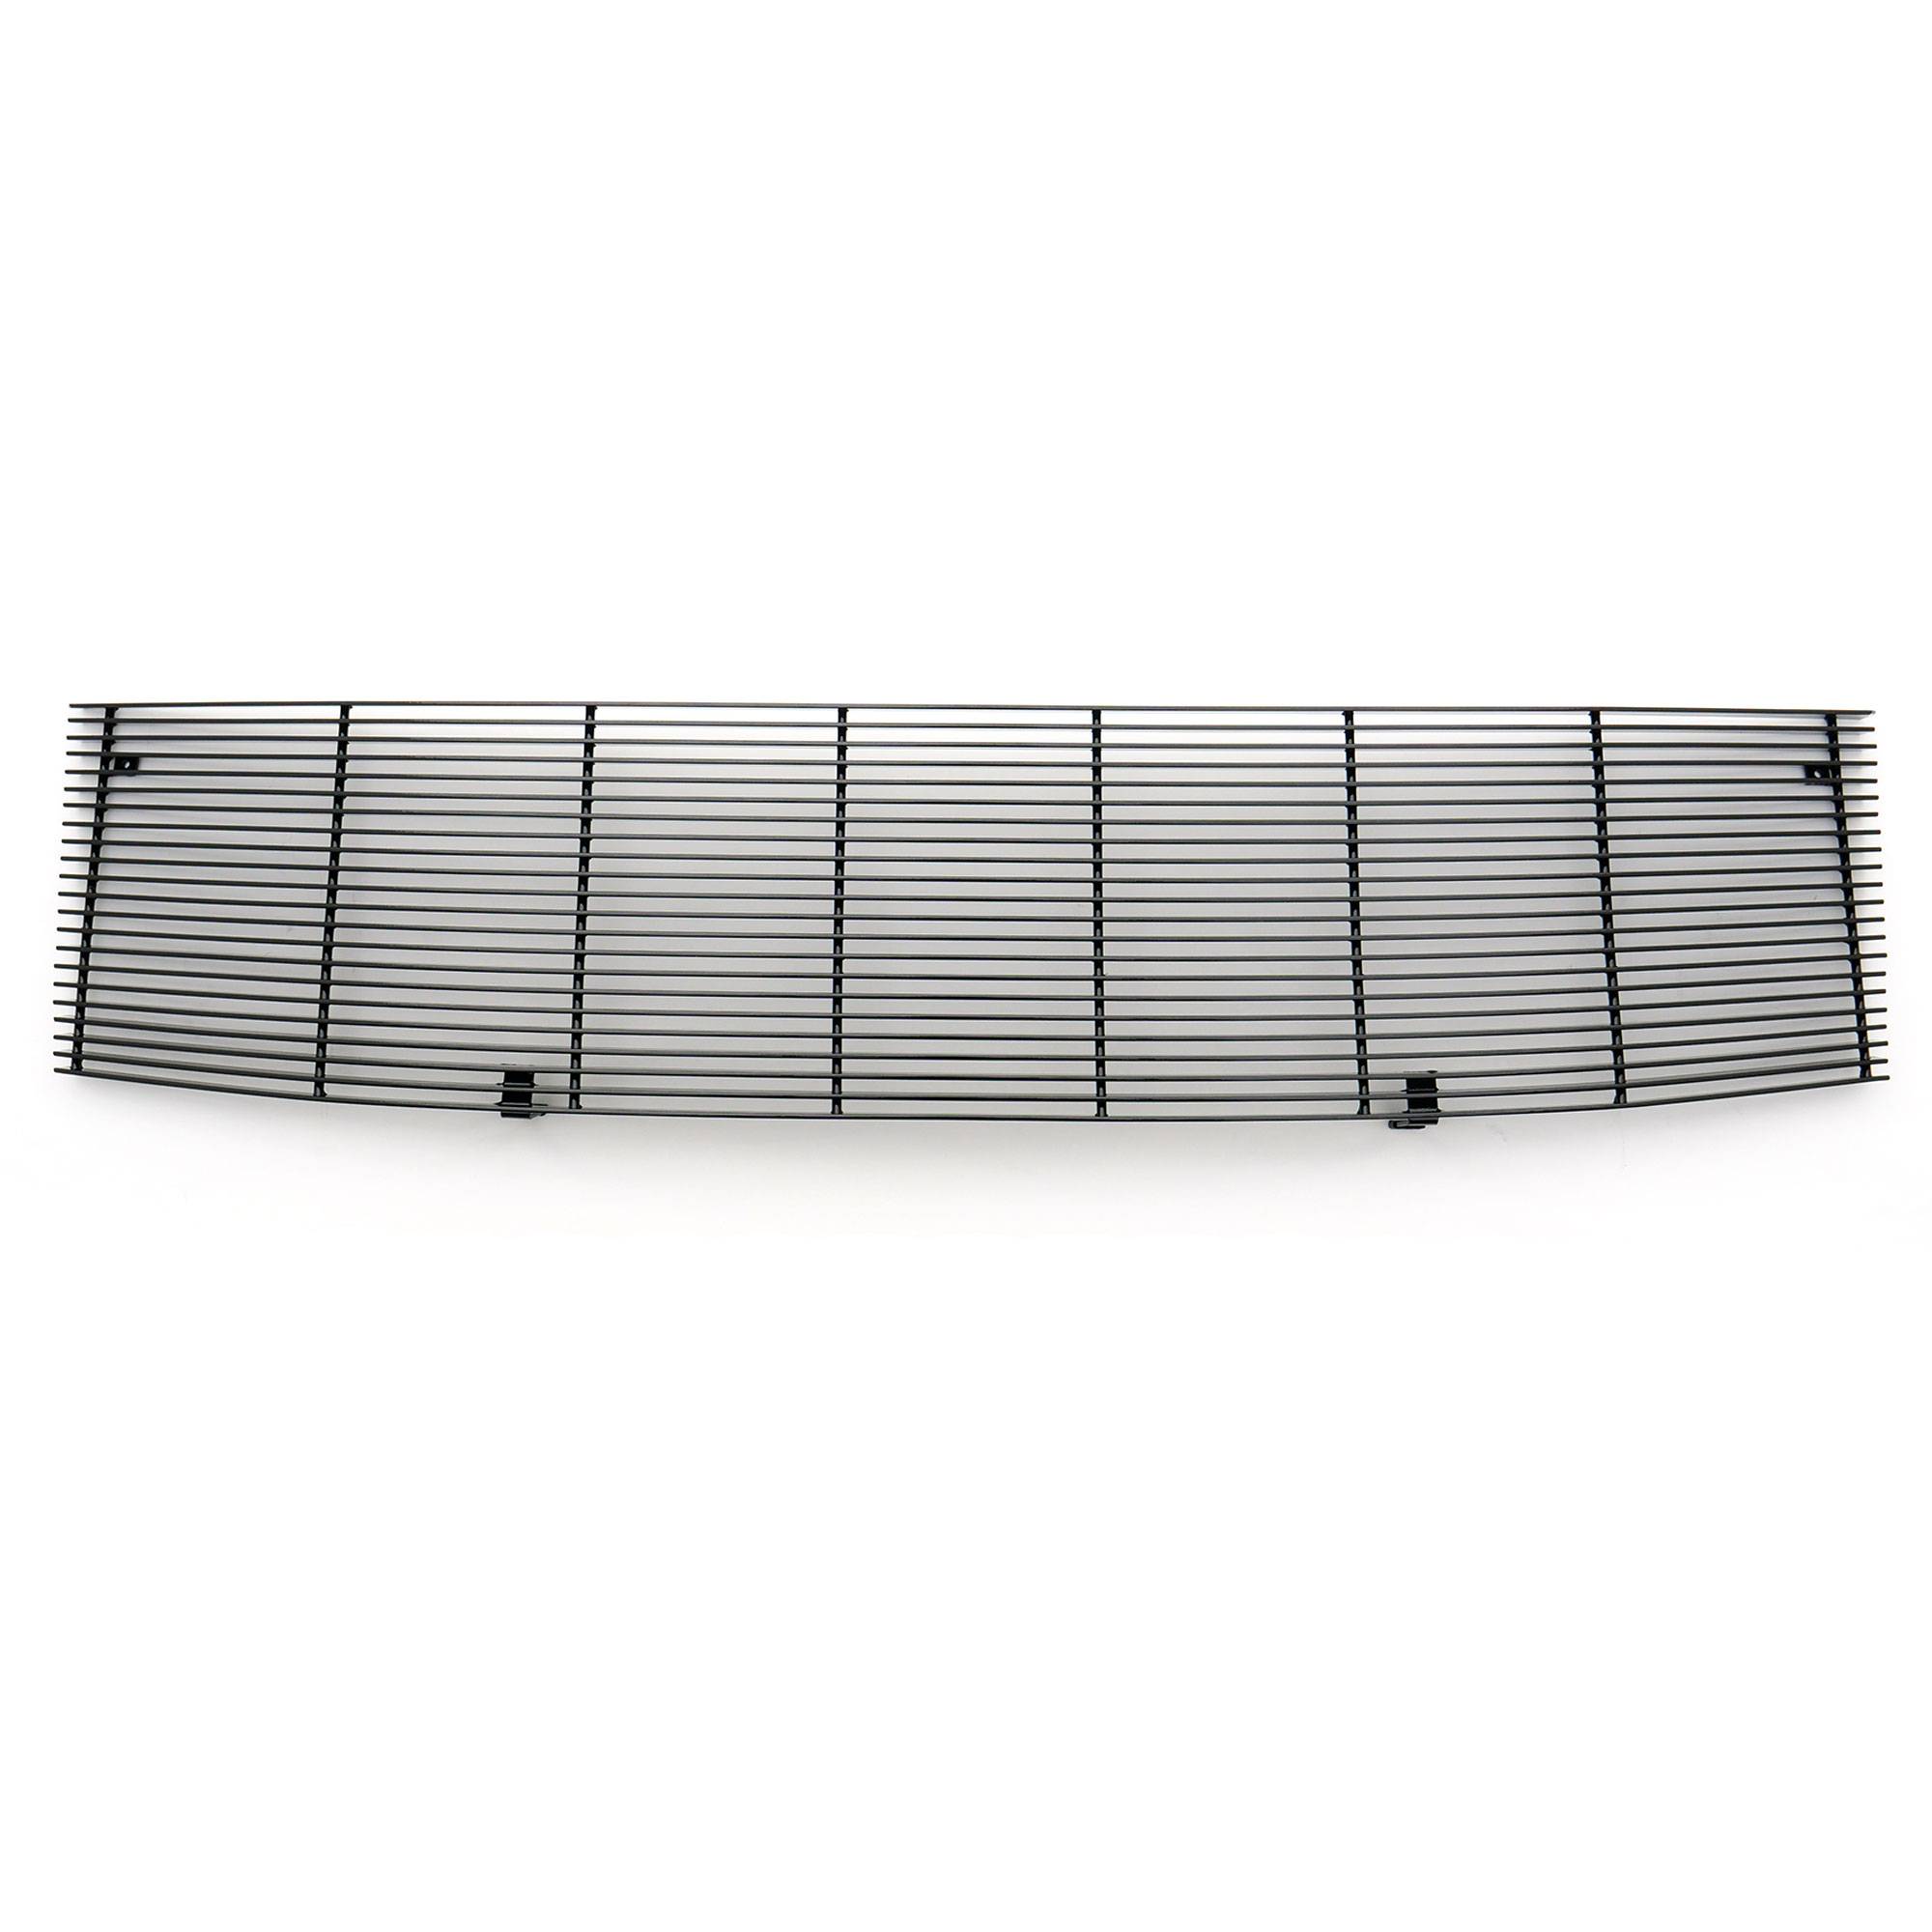 Compatible with 2004-2015 Nissan Titan 04-07 Armada Lower Bumper Billet Grille Insert N19-A31458N 